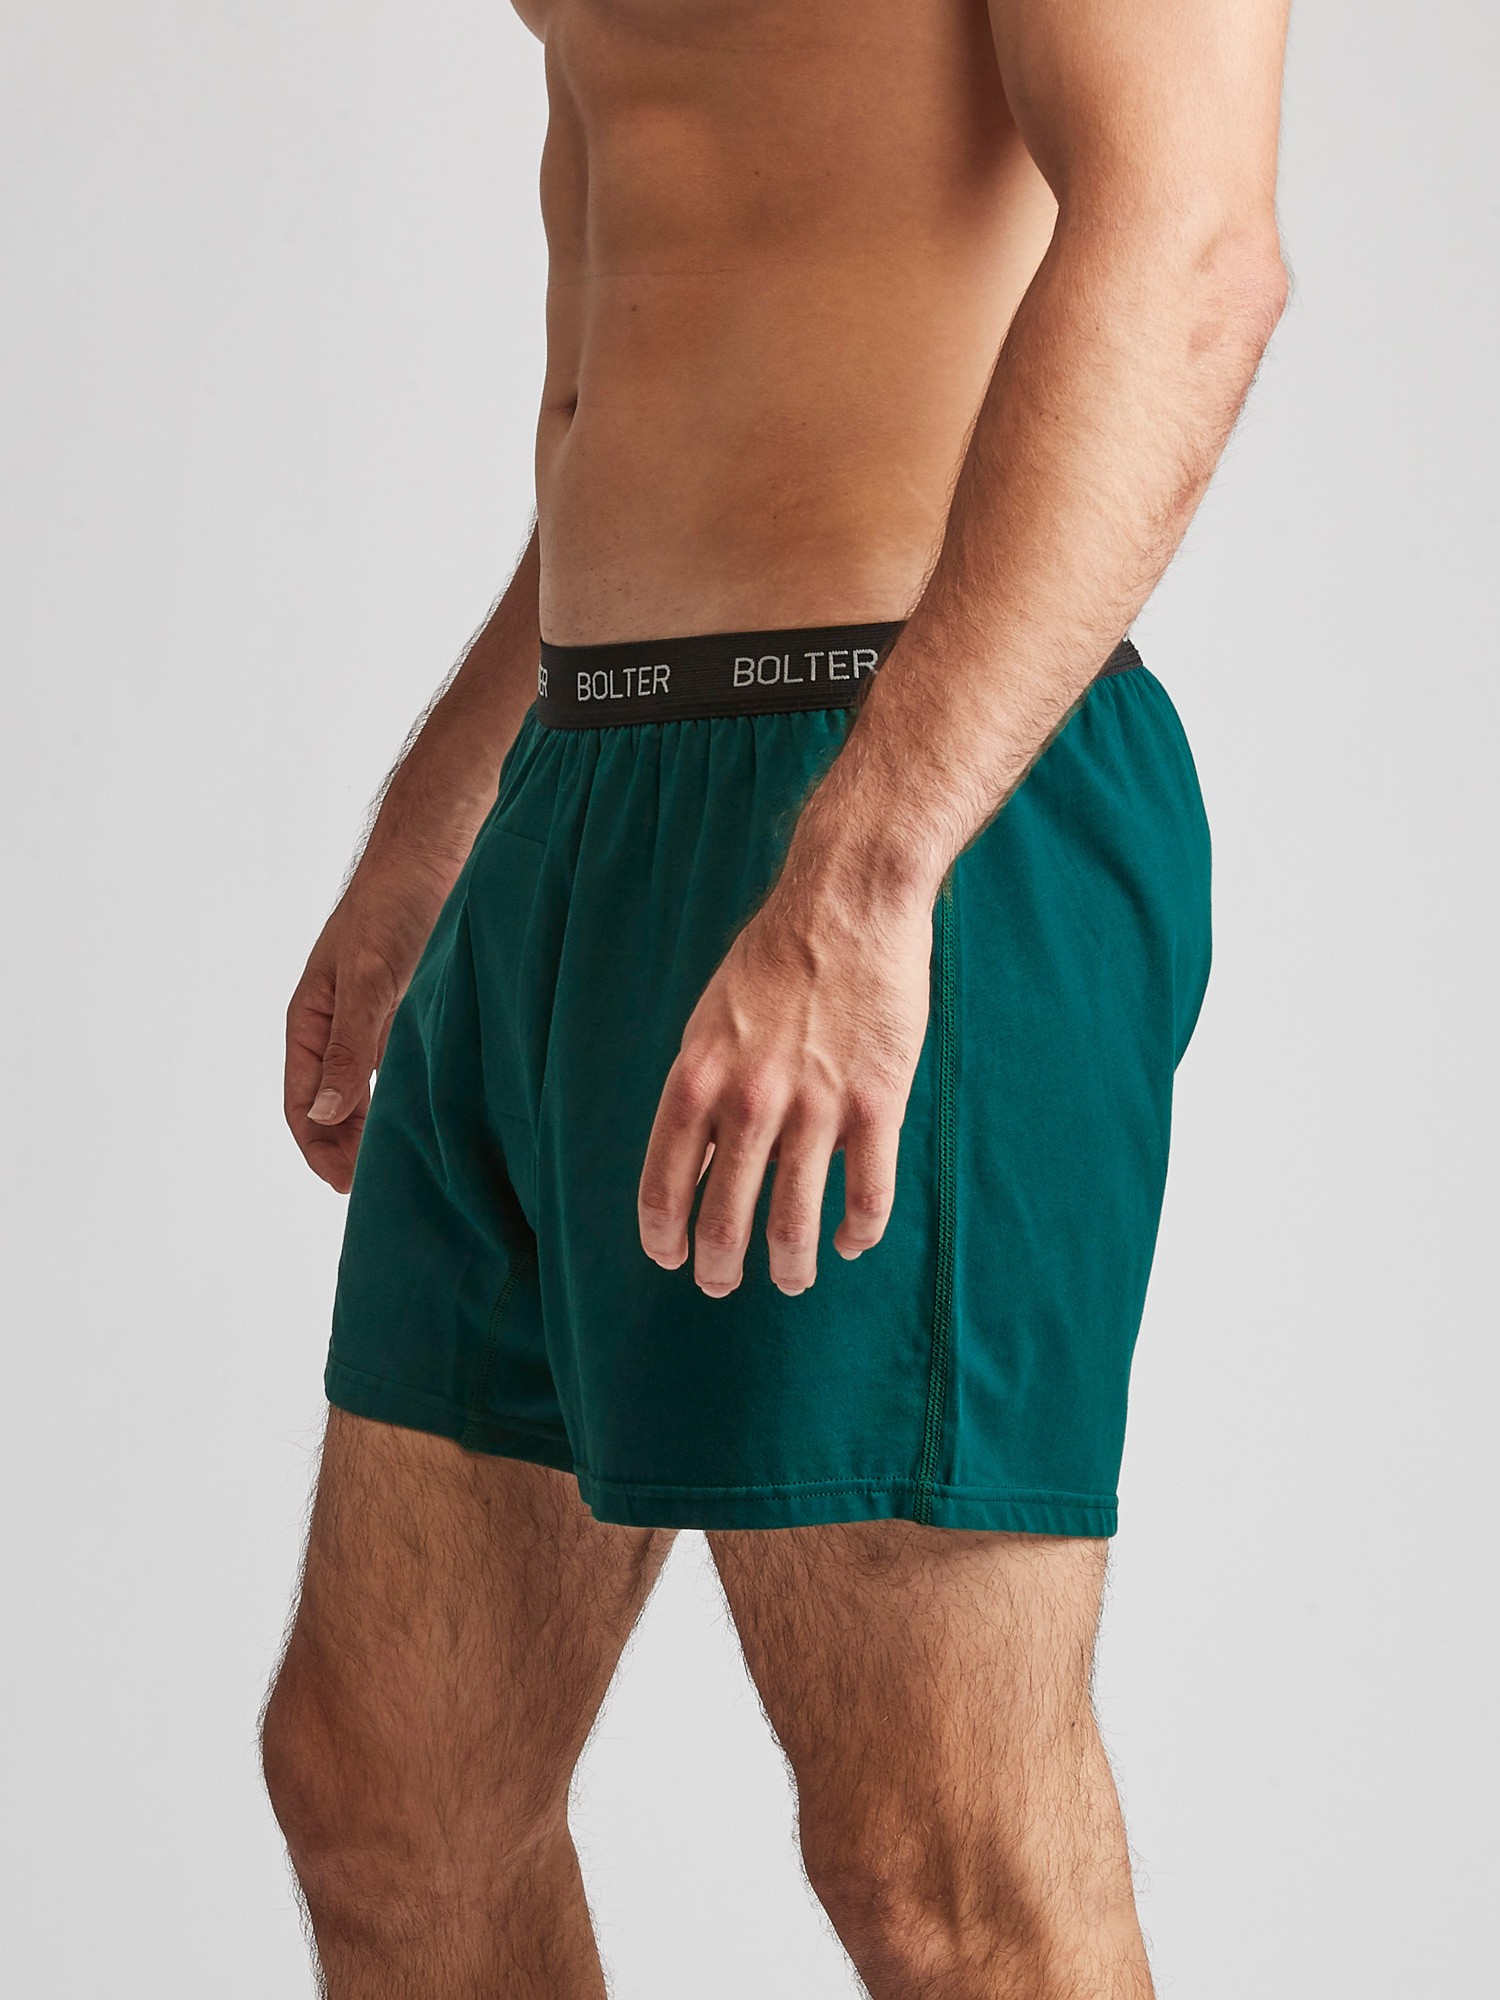 Bolter Men's 5-Pack Cotton Stretch Boxers Shorts (XXX-Large, Greens) - image 5 of 11